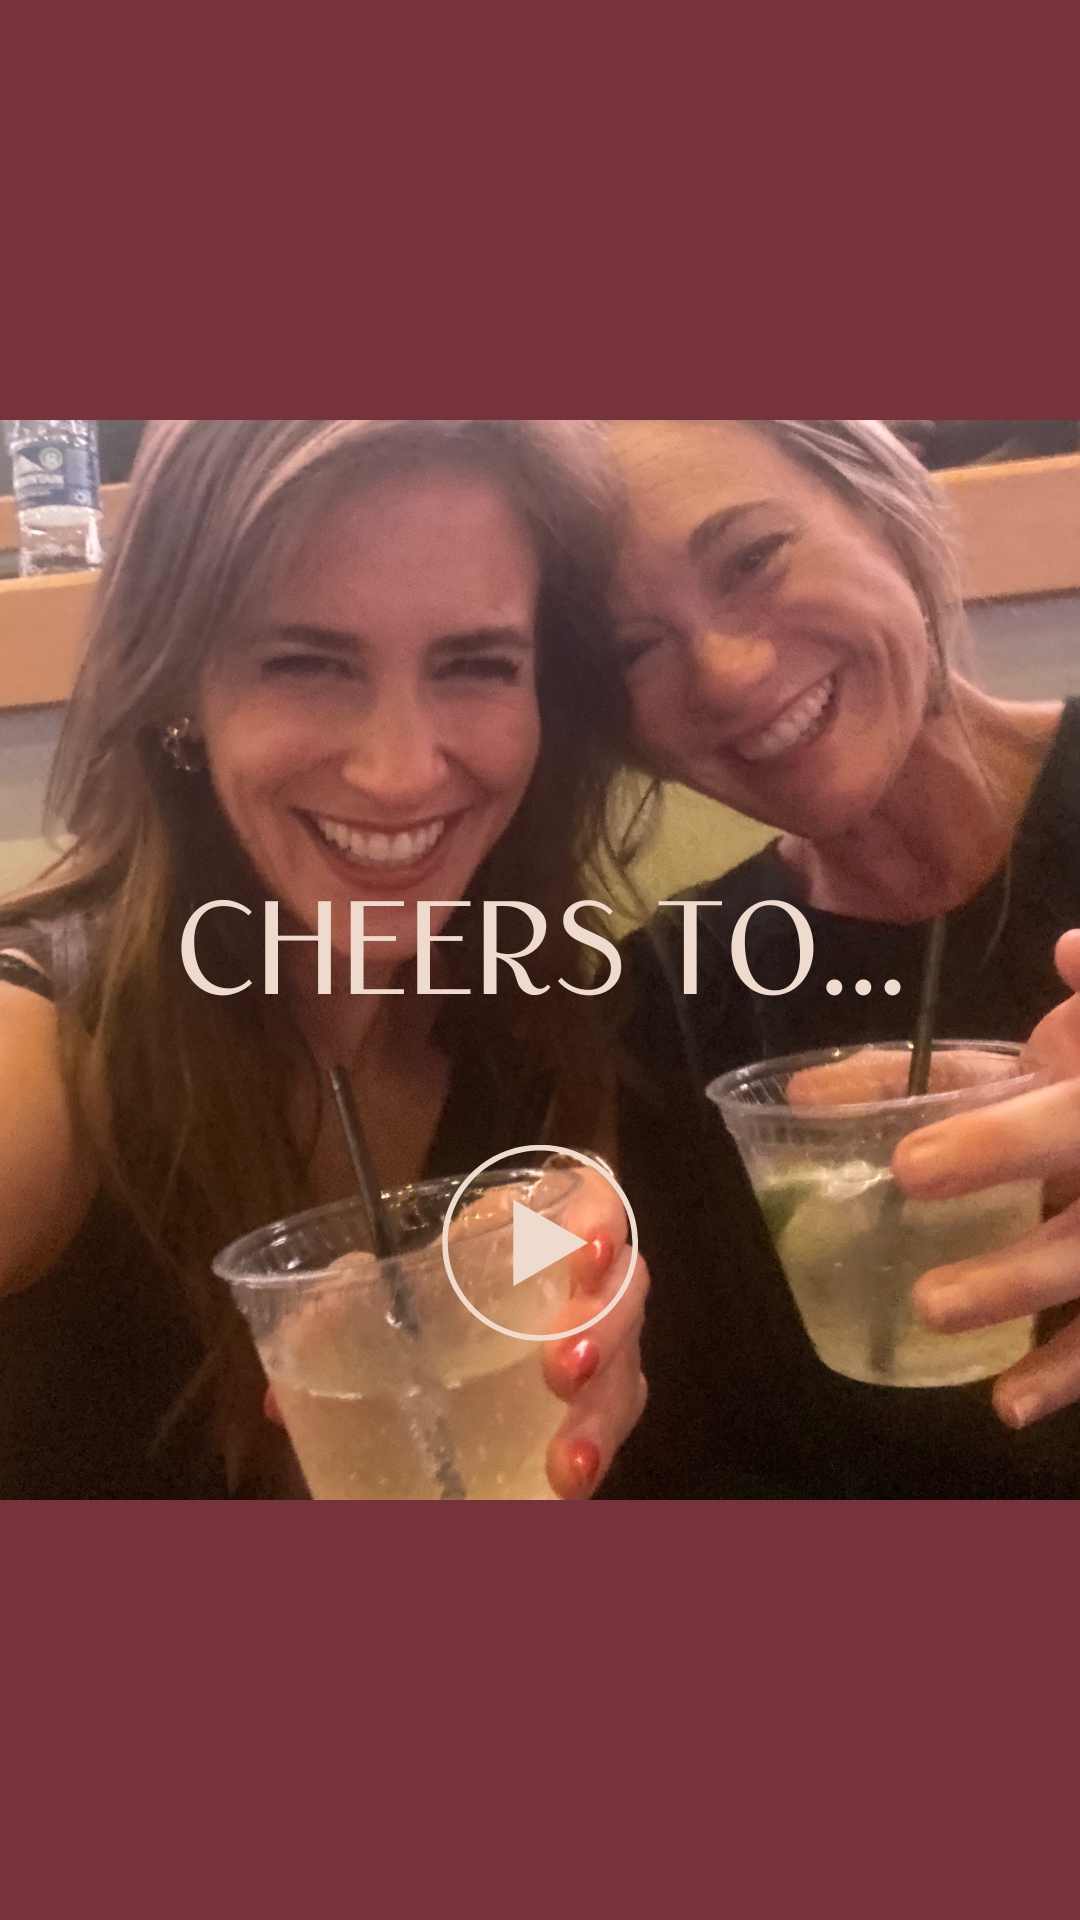 AW-Cheers to...-2